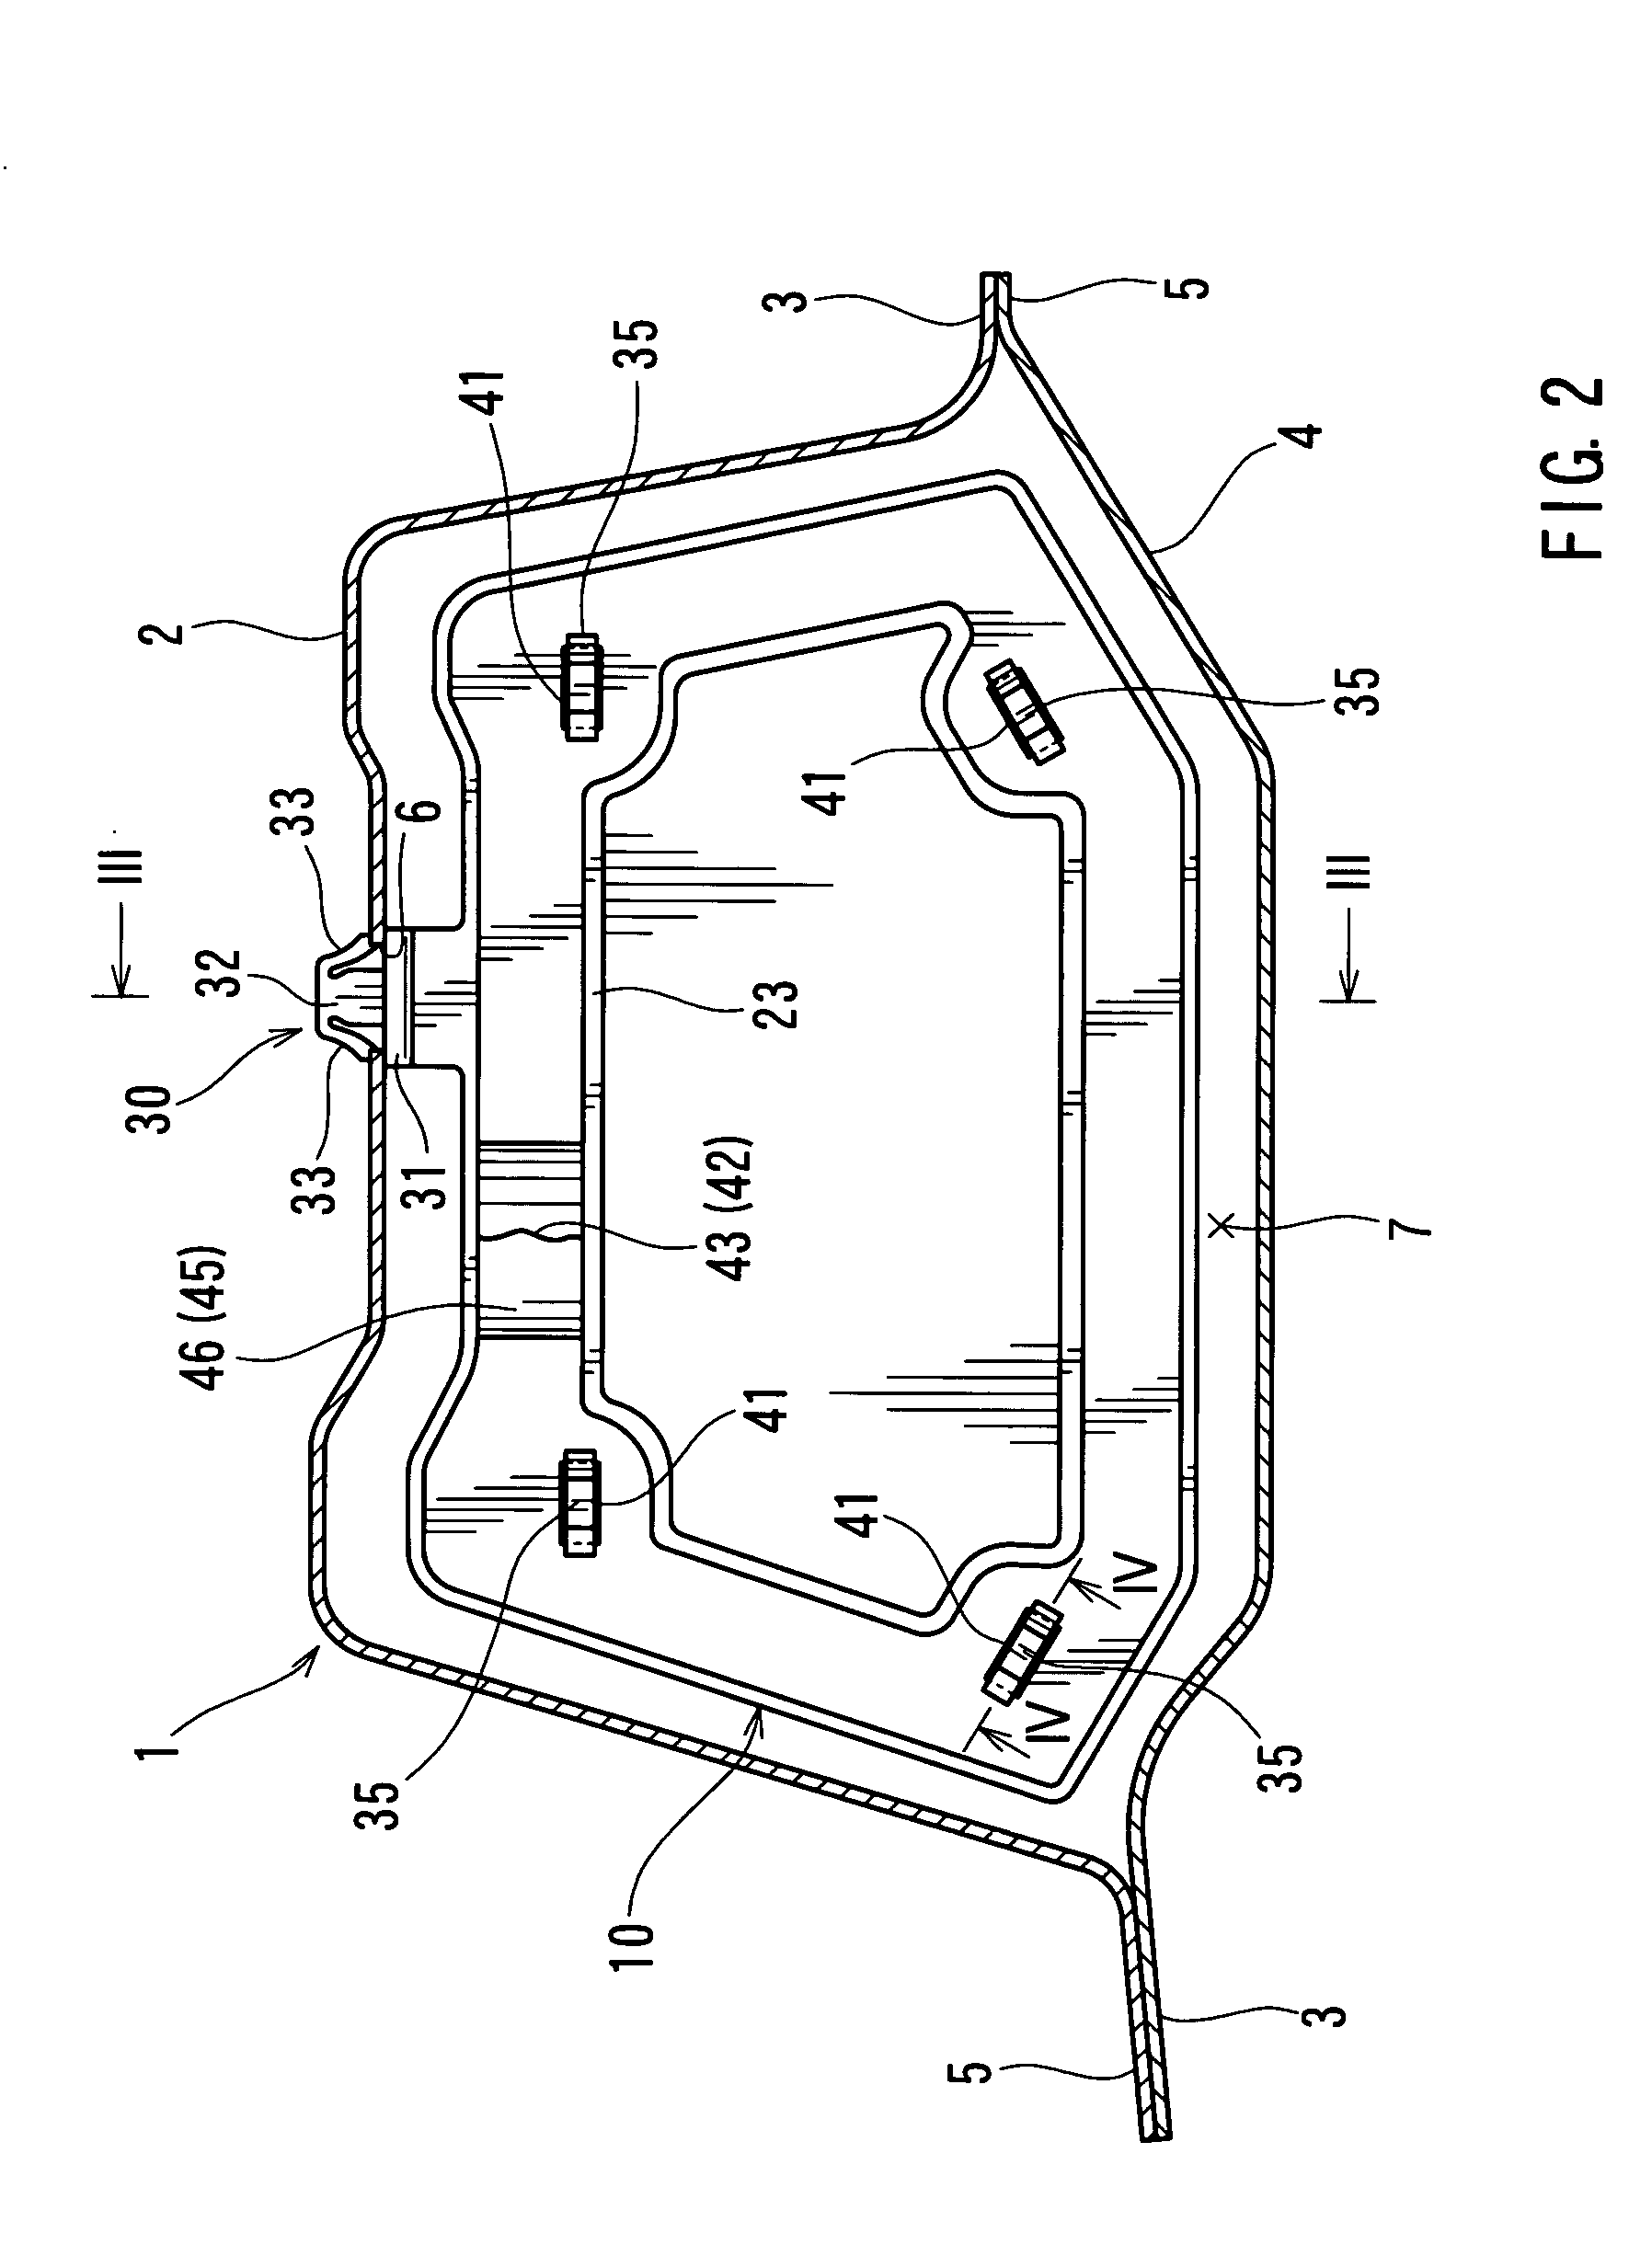 Blocking devices for hollow structures